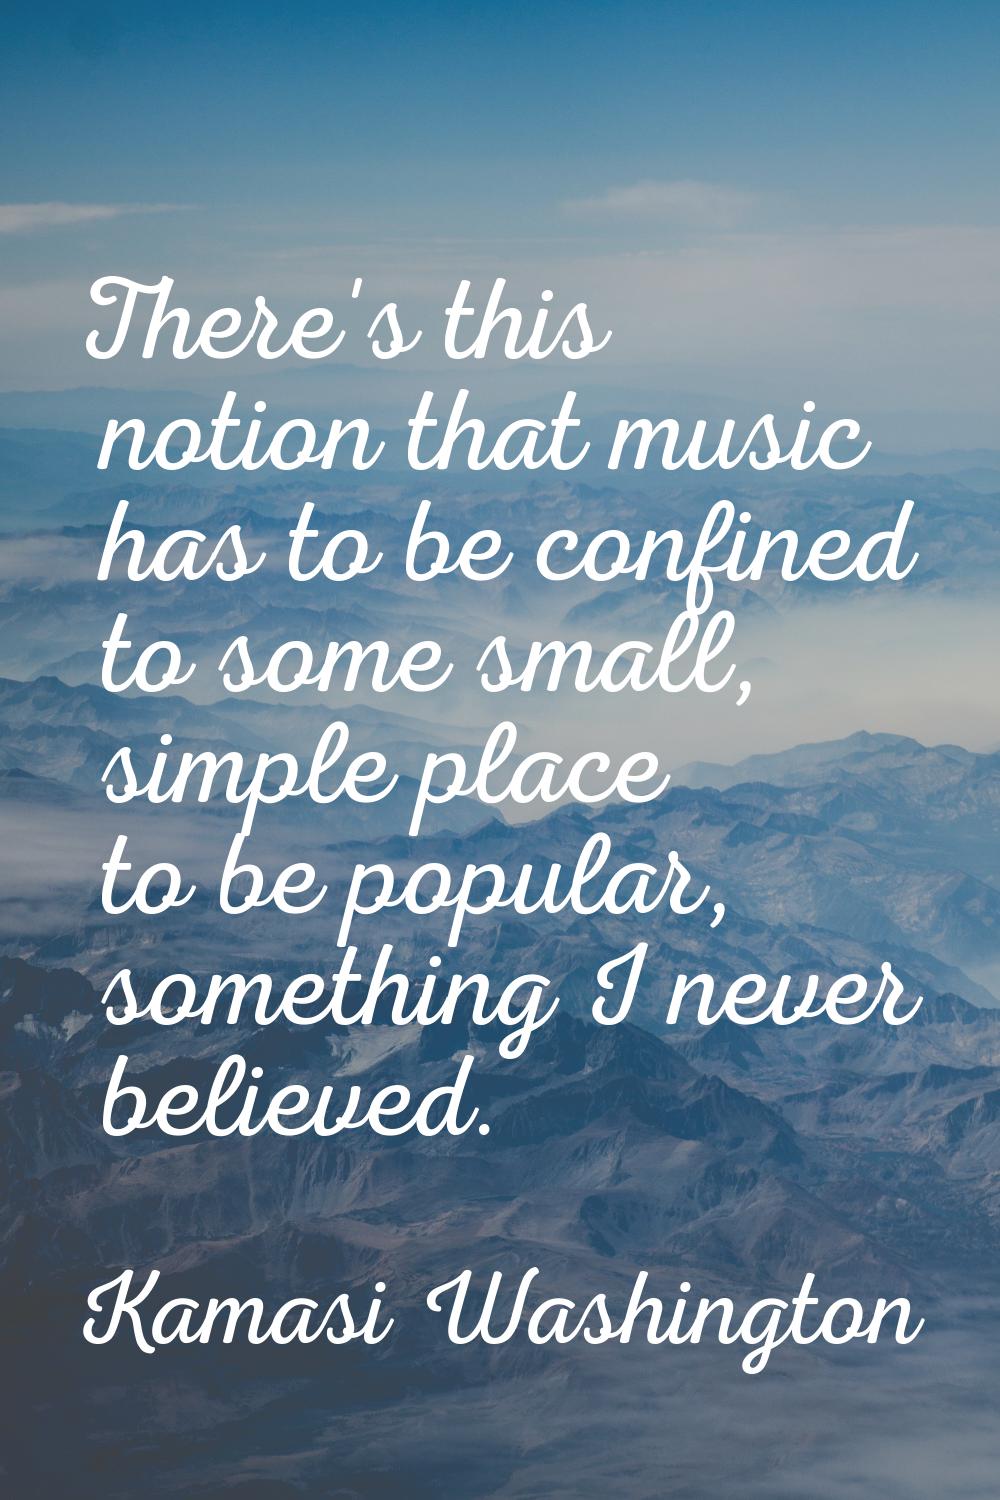 There's this notion that music has to be confined to some small, simple place to be popular, someth